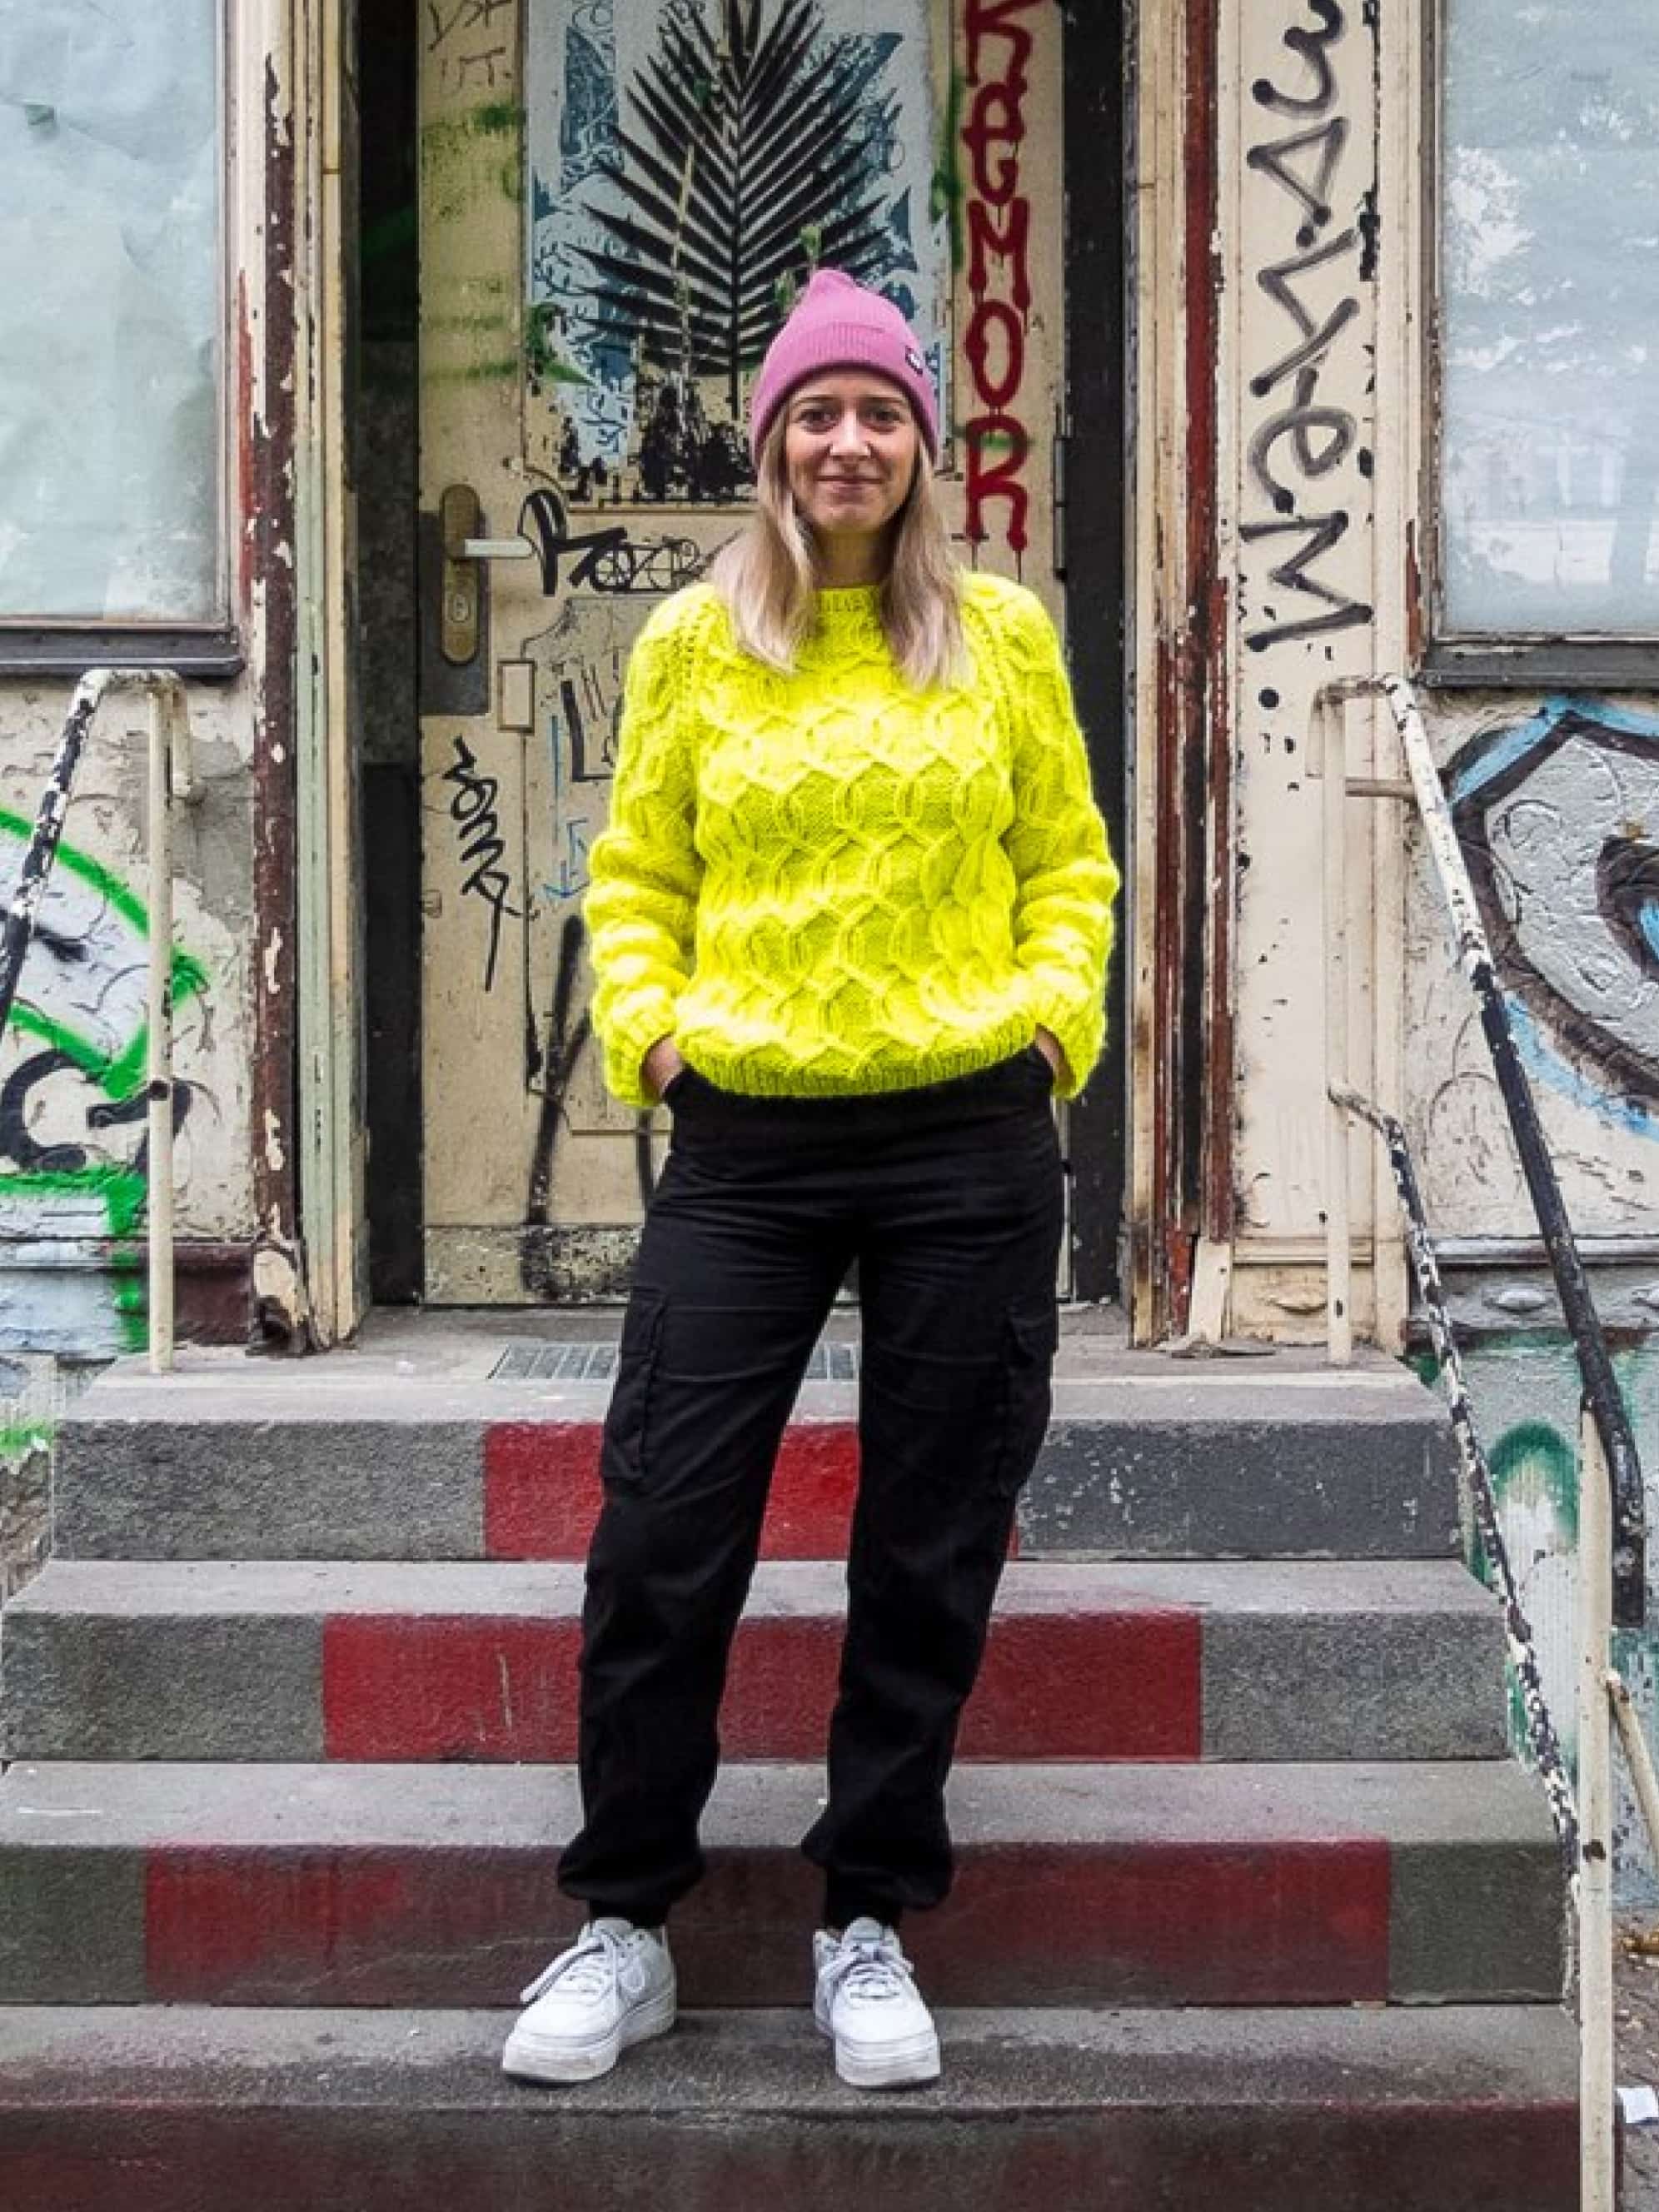 A woman in a yellow sweater and black trousers with a pink cap is standing on a staircase.